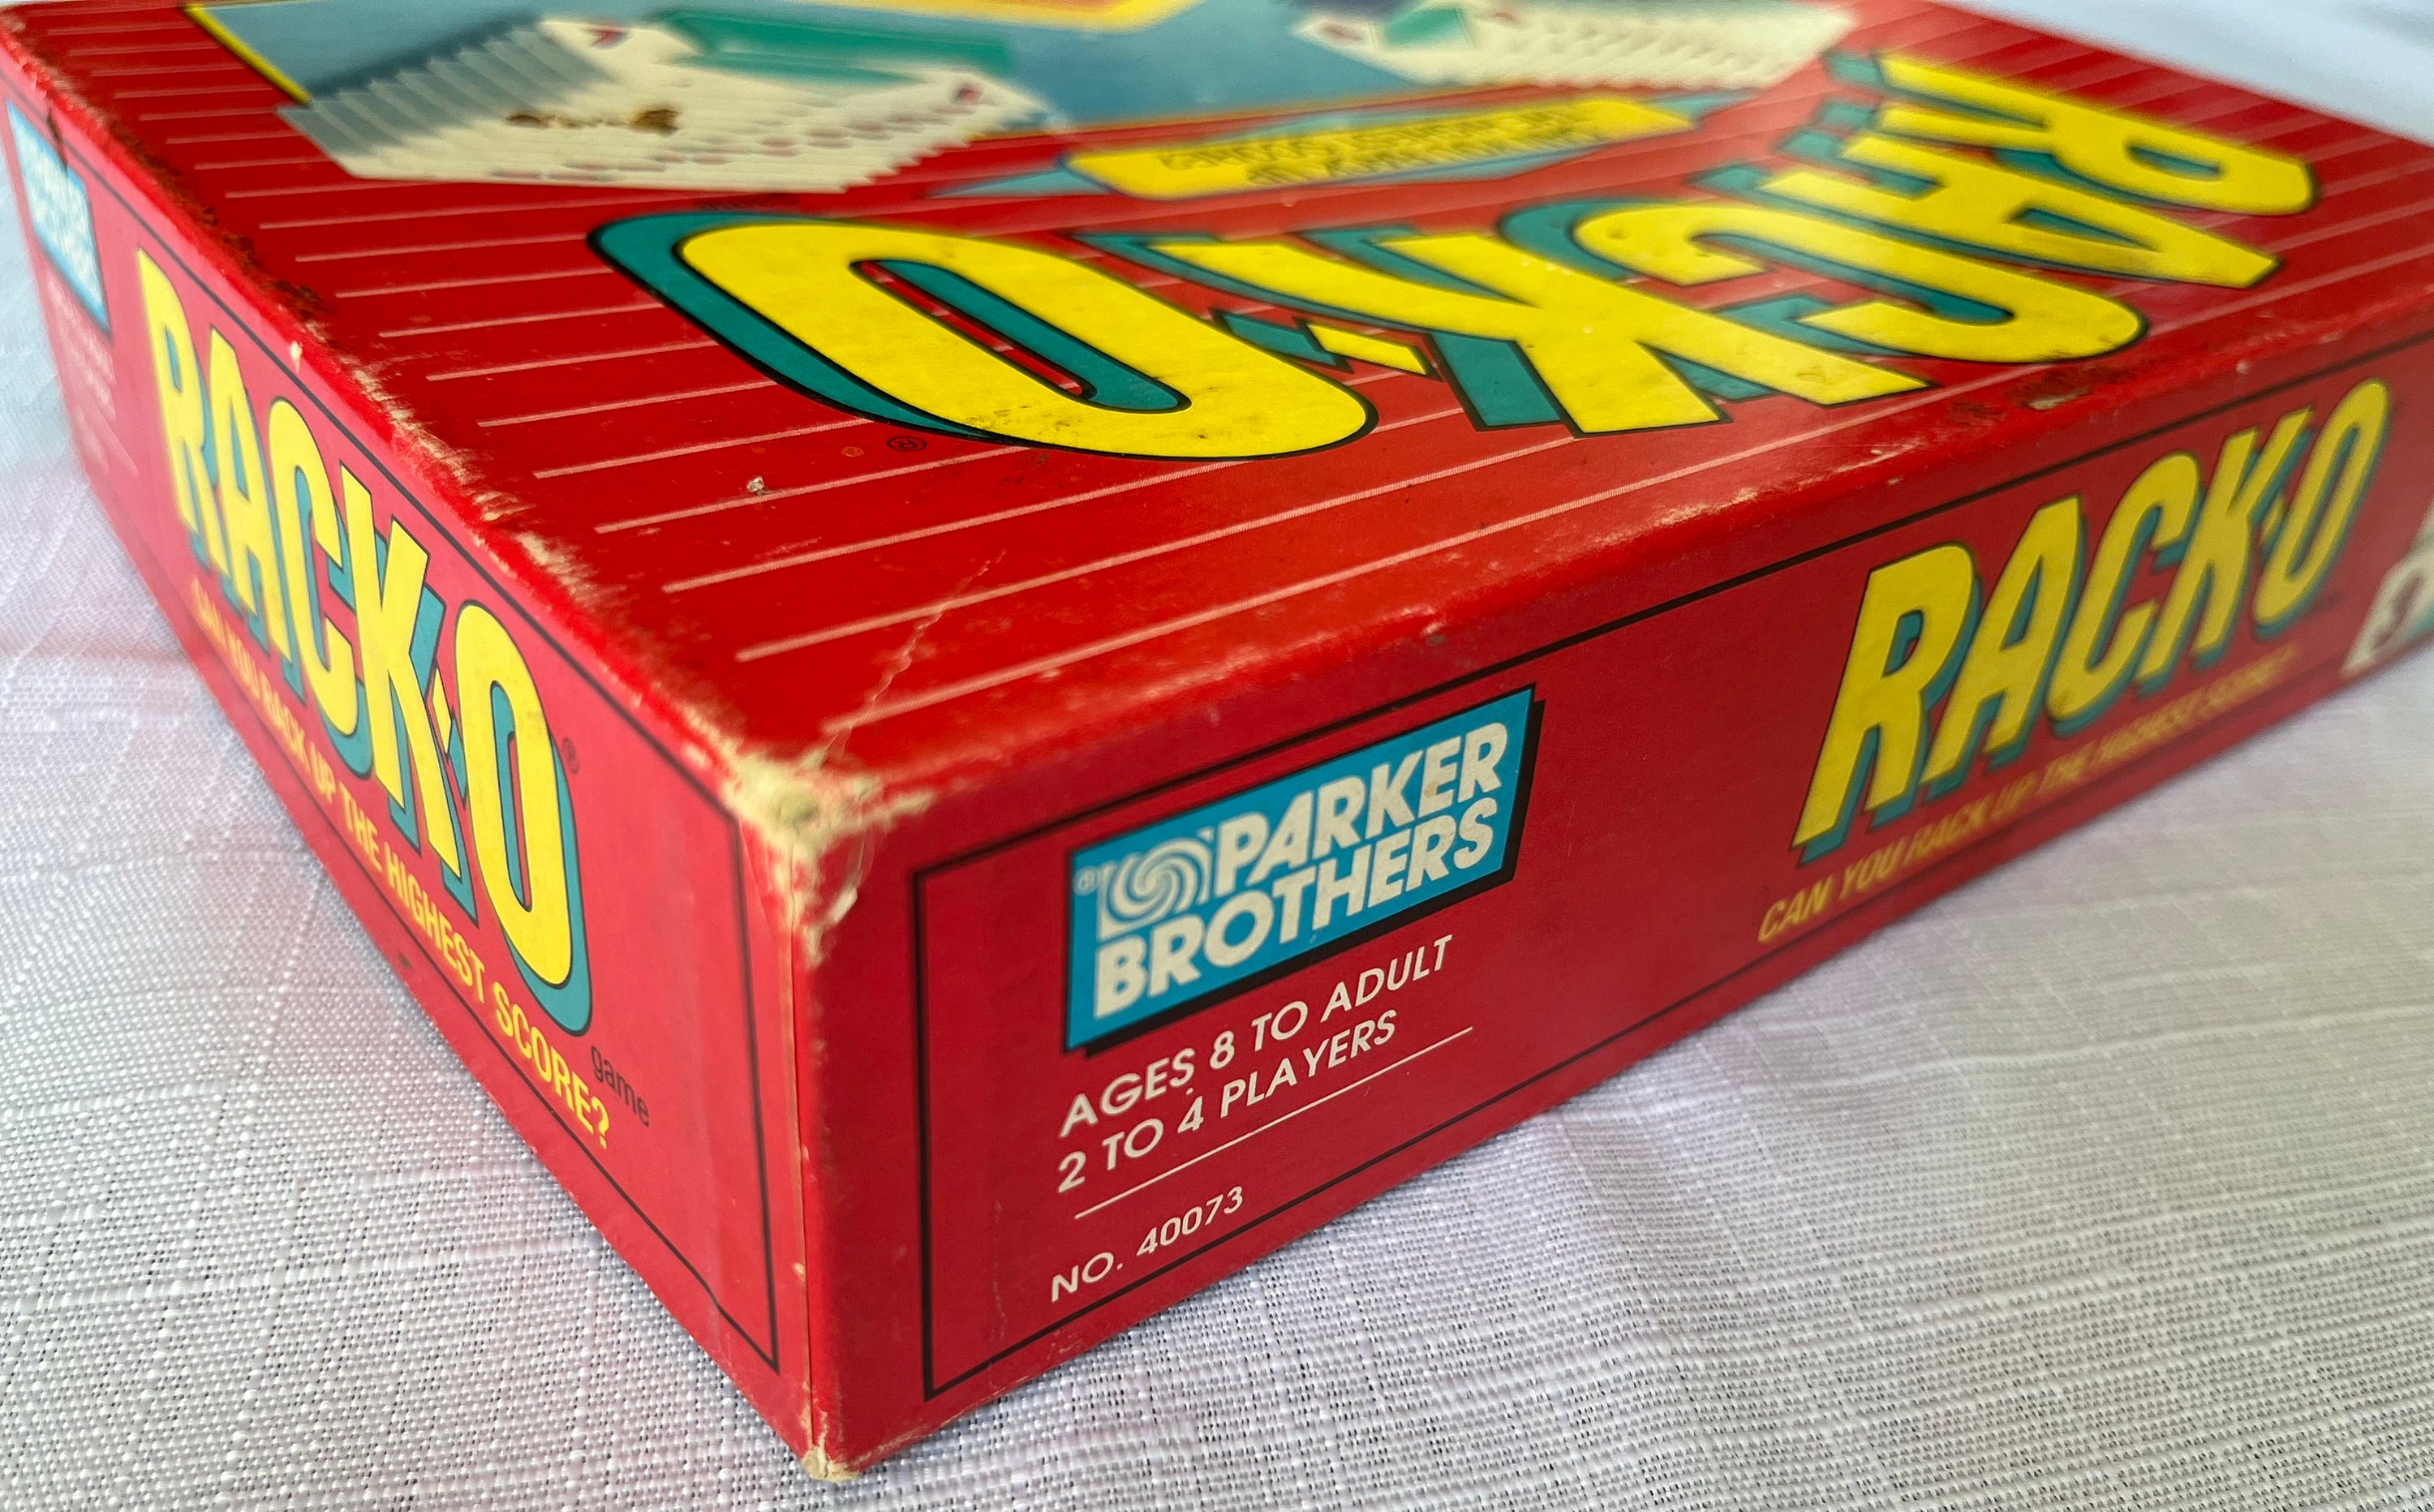 Parker Brothers RACK-O 2-4 Players Card Game No. 40073